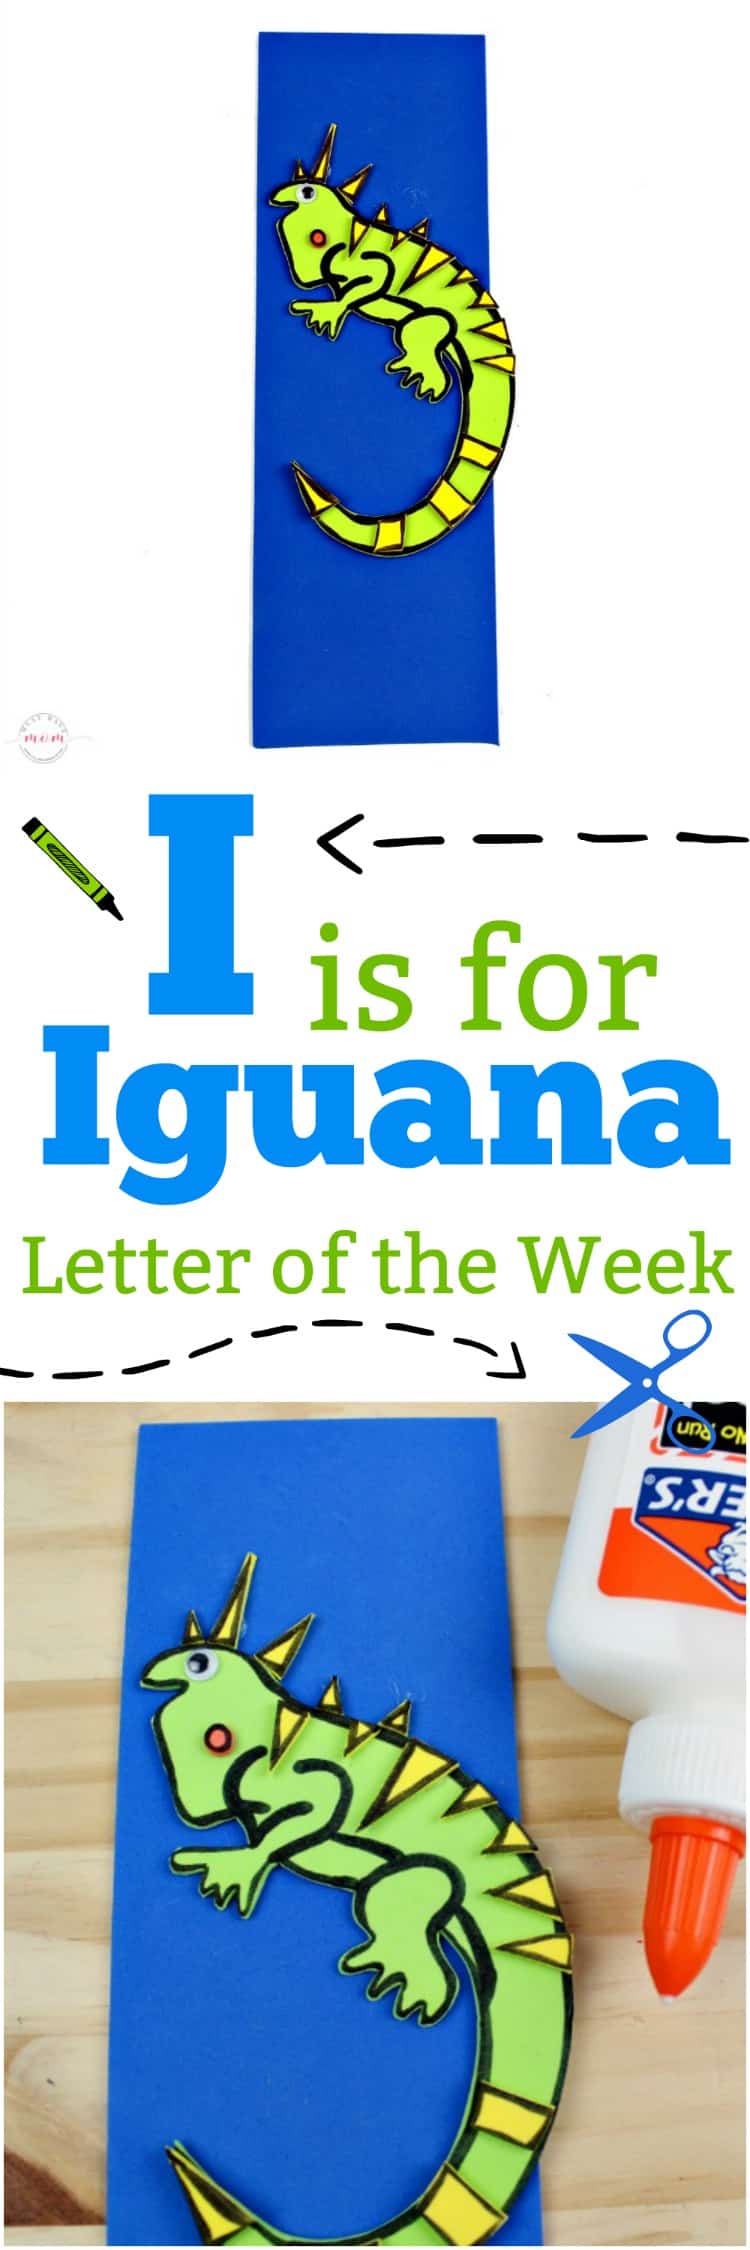 letter-of-the-week-letter-craft-i-is-for-iguana-must-have-mom